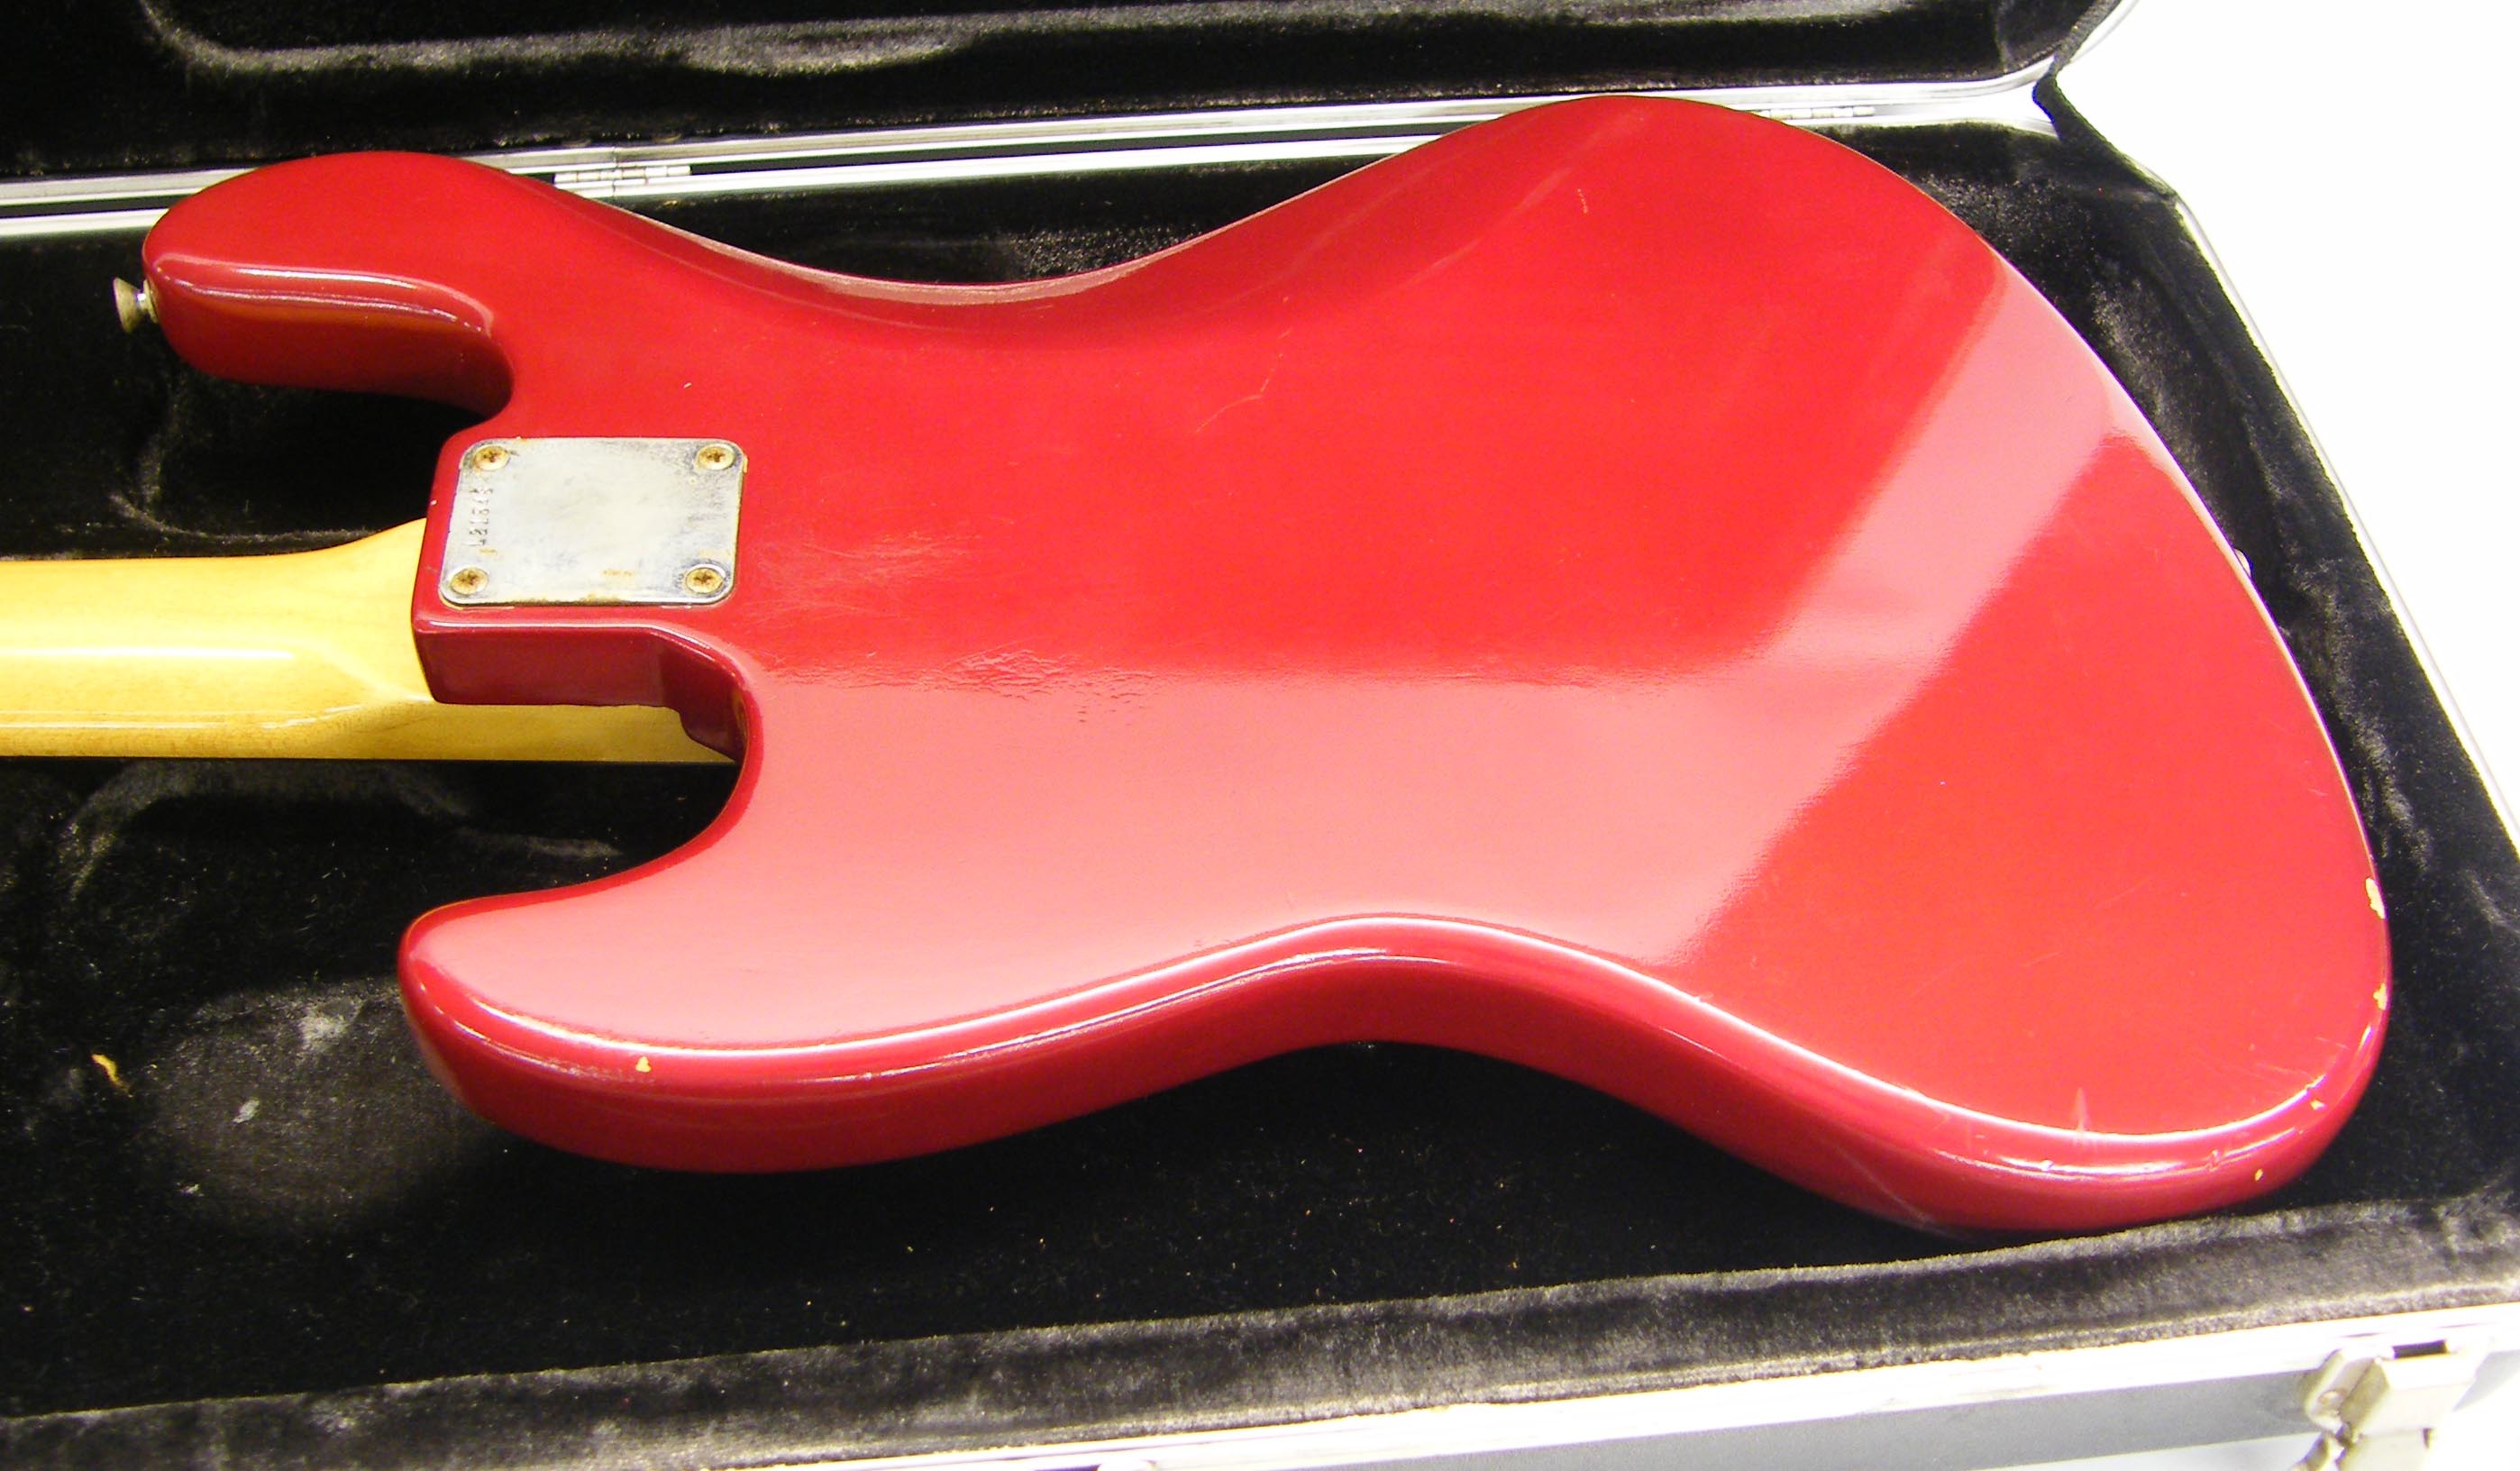 1964 Fender Jazz Bass electric bass guitar, made in USA, ser. no. L21548, red re-finish with various - Image 4 of 9